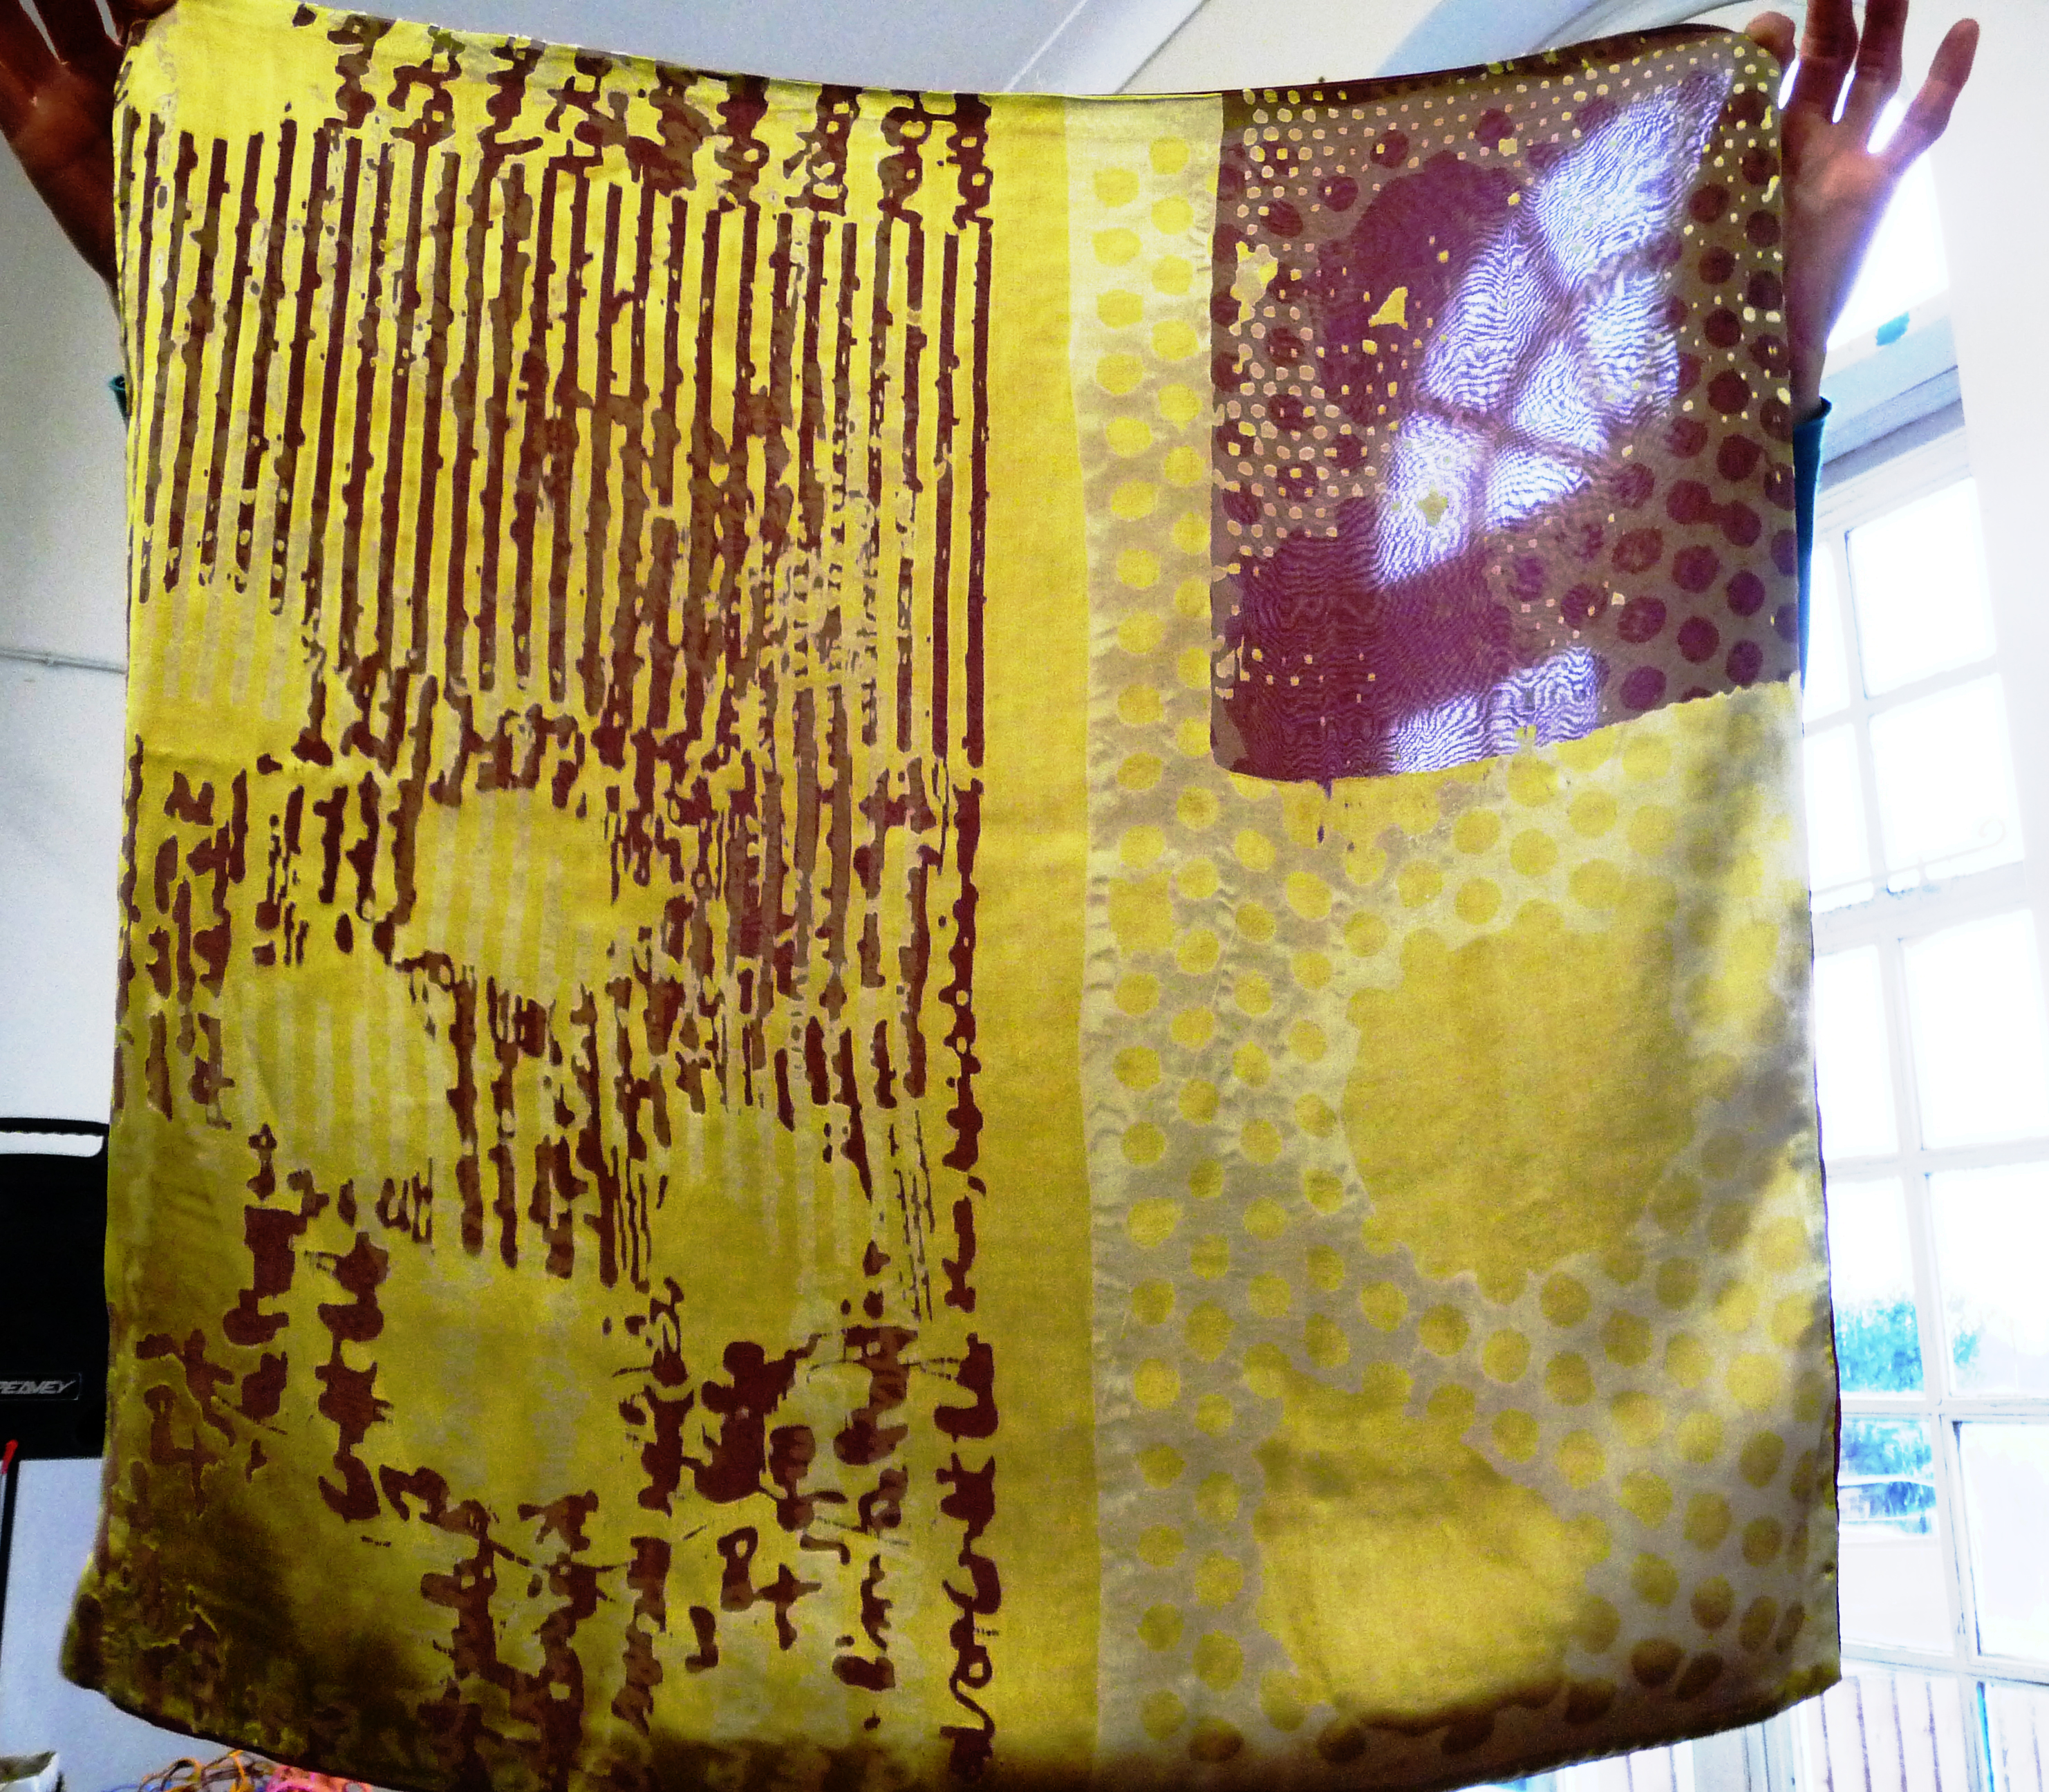 textile created by a devoure technique by Christine Toh